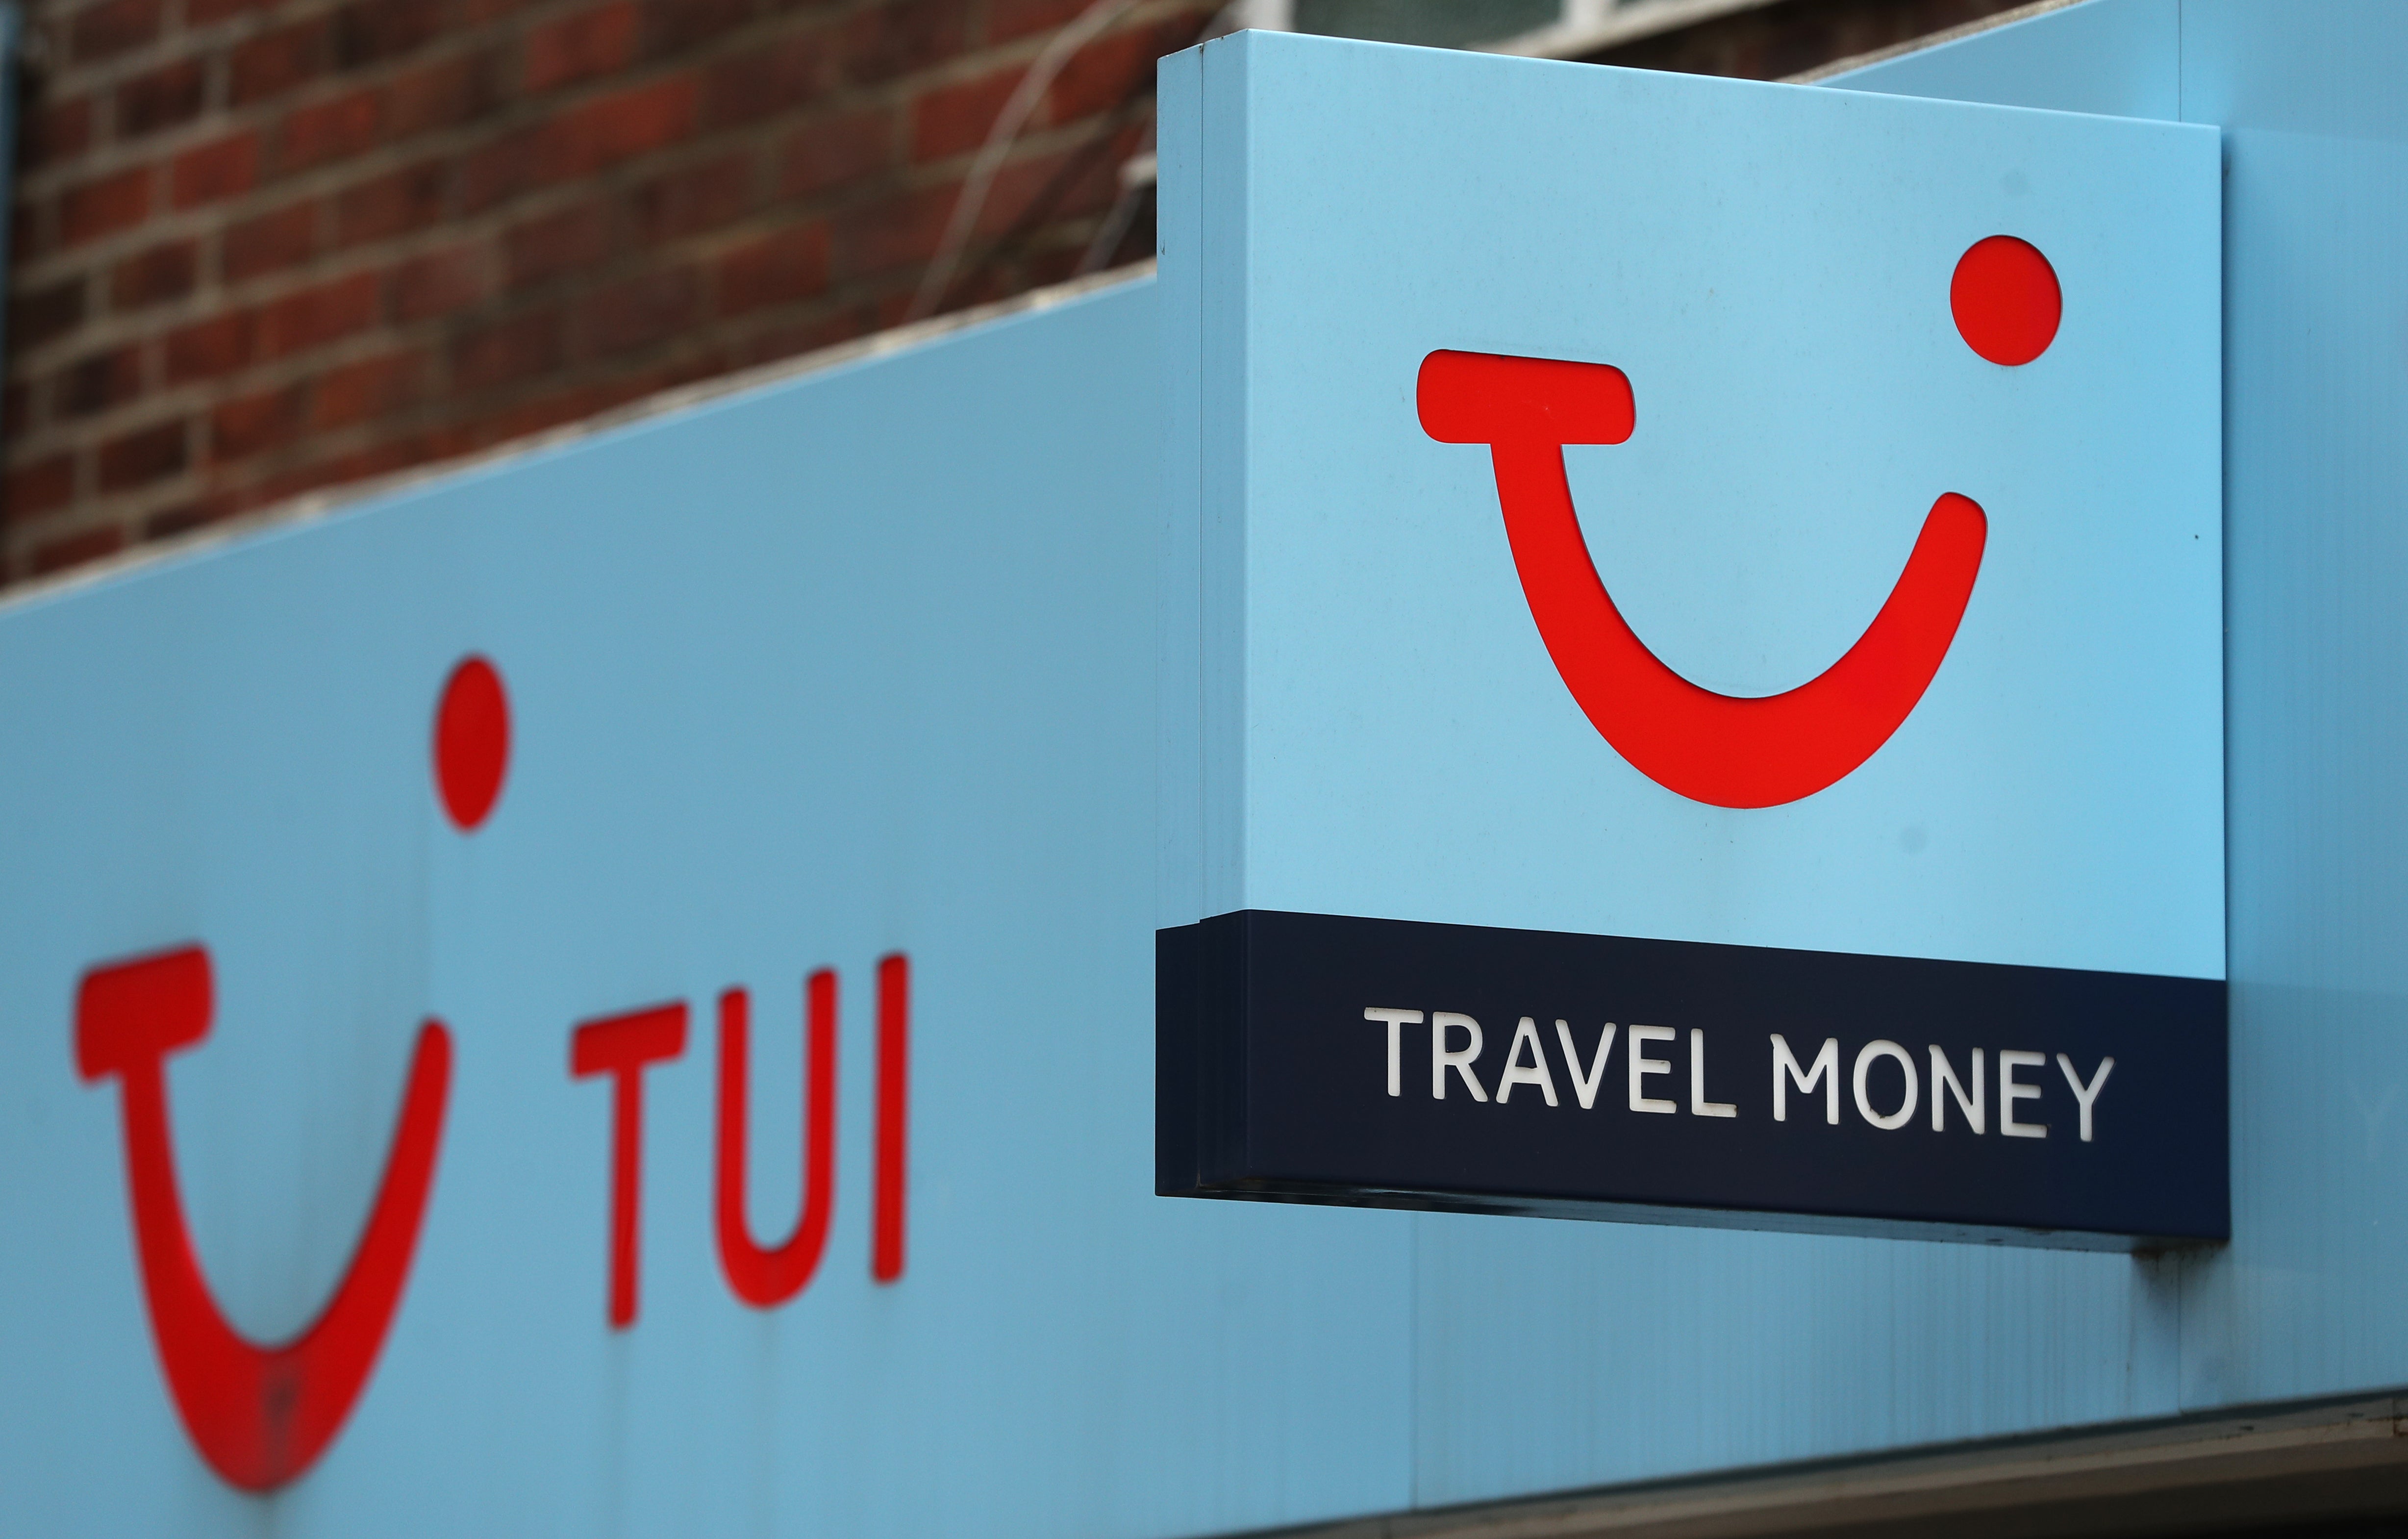 Travel giant Tui has unveiled plans for a 1.1 billion euro (£936 million) cash call to cut debts as it said bookings were bouncing back thanks to the relaxation of travel restrictions (PA)